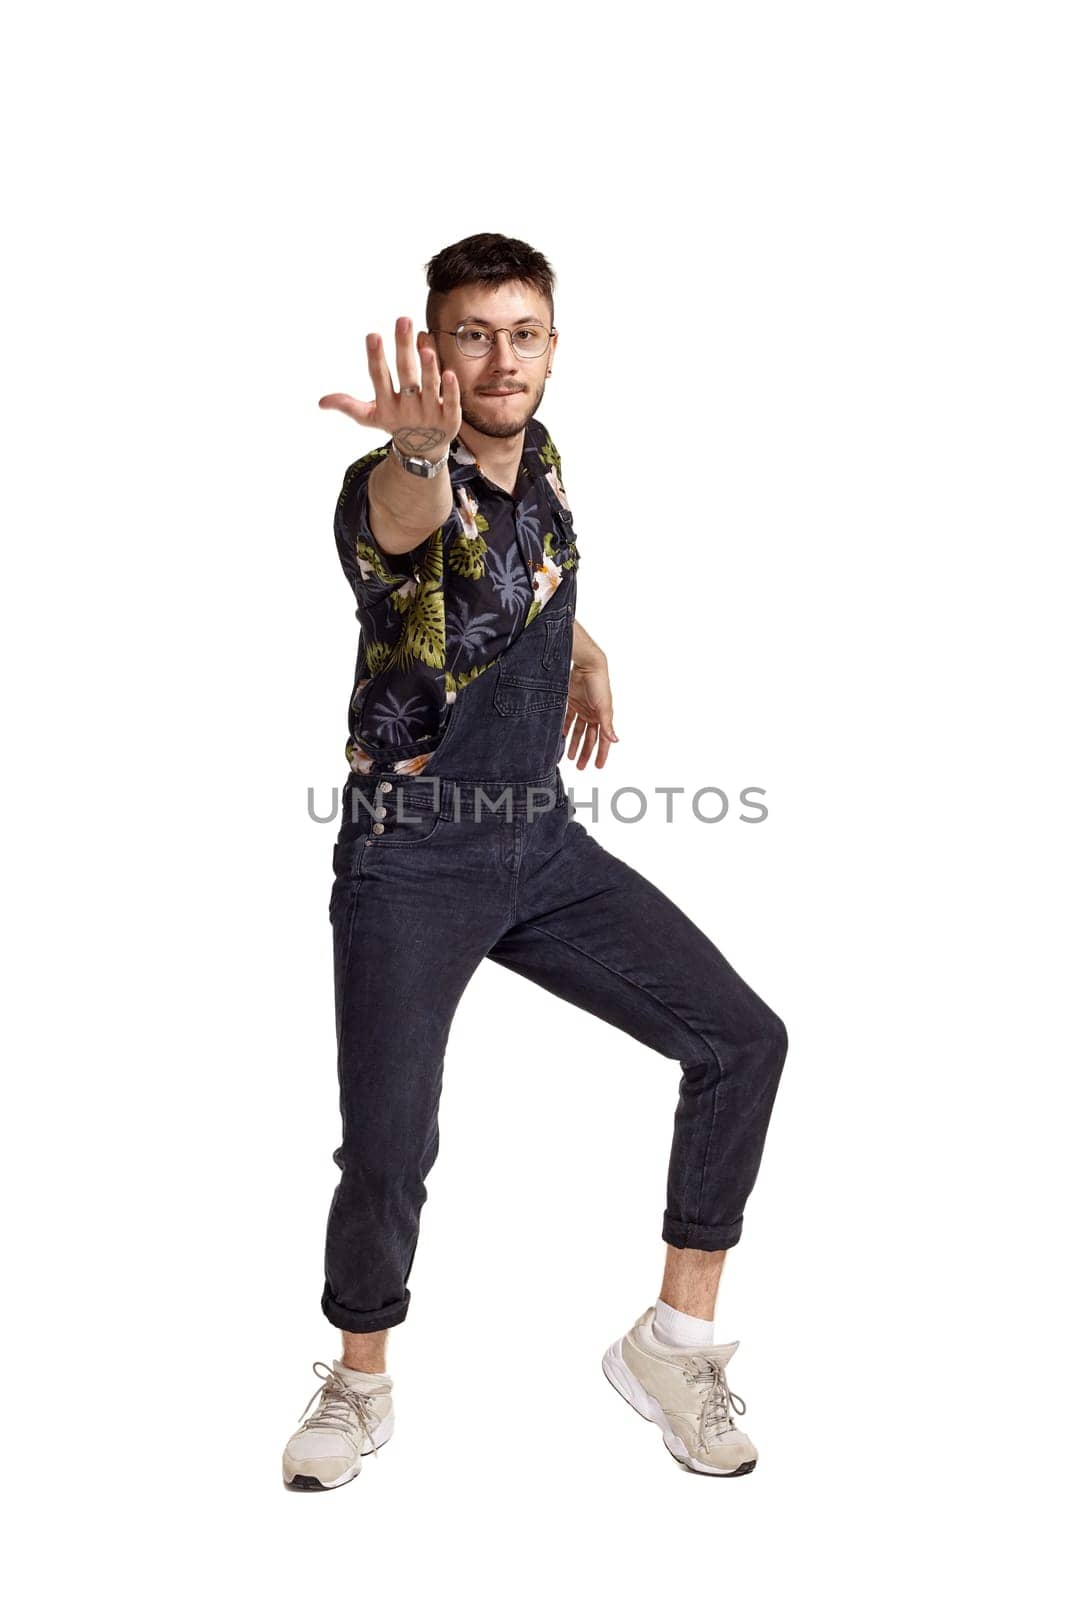 Full-length portrait of a graceful man in glasses, black jumpsuit, colorful t-shirt and gray sneakers fooling around in studio. Indoor photo of a man dancing isolated on white background. Music and imagination concept.